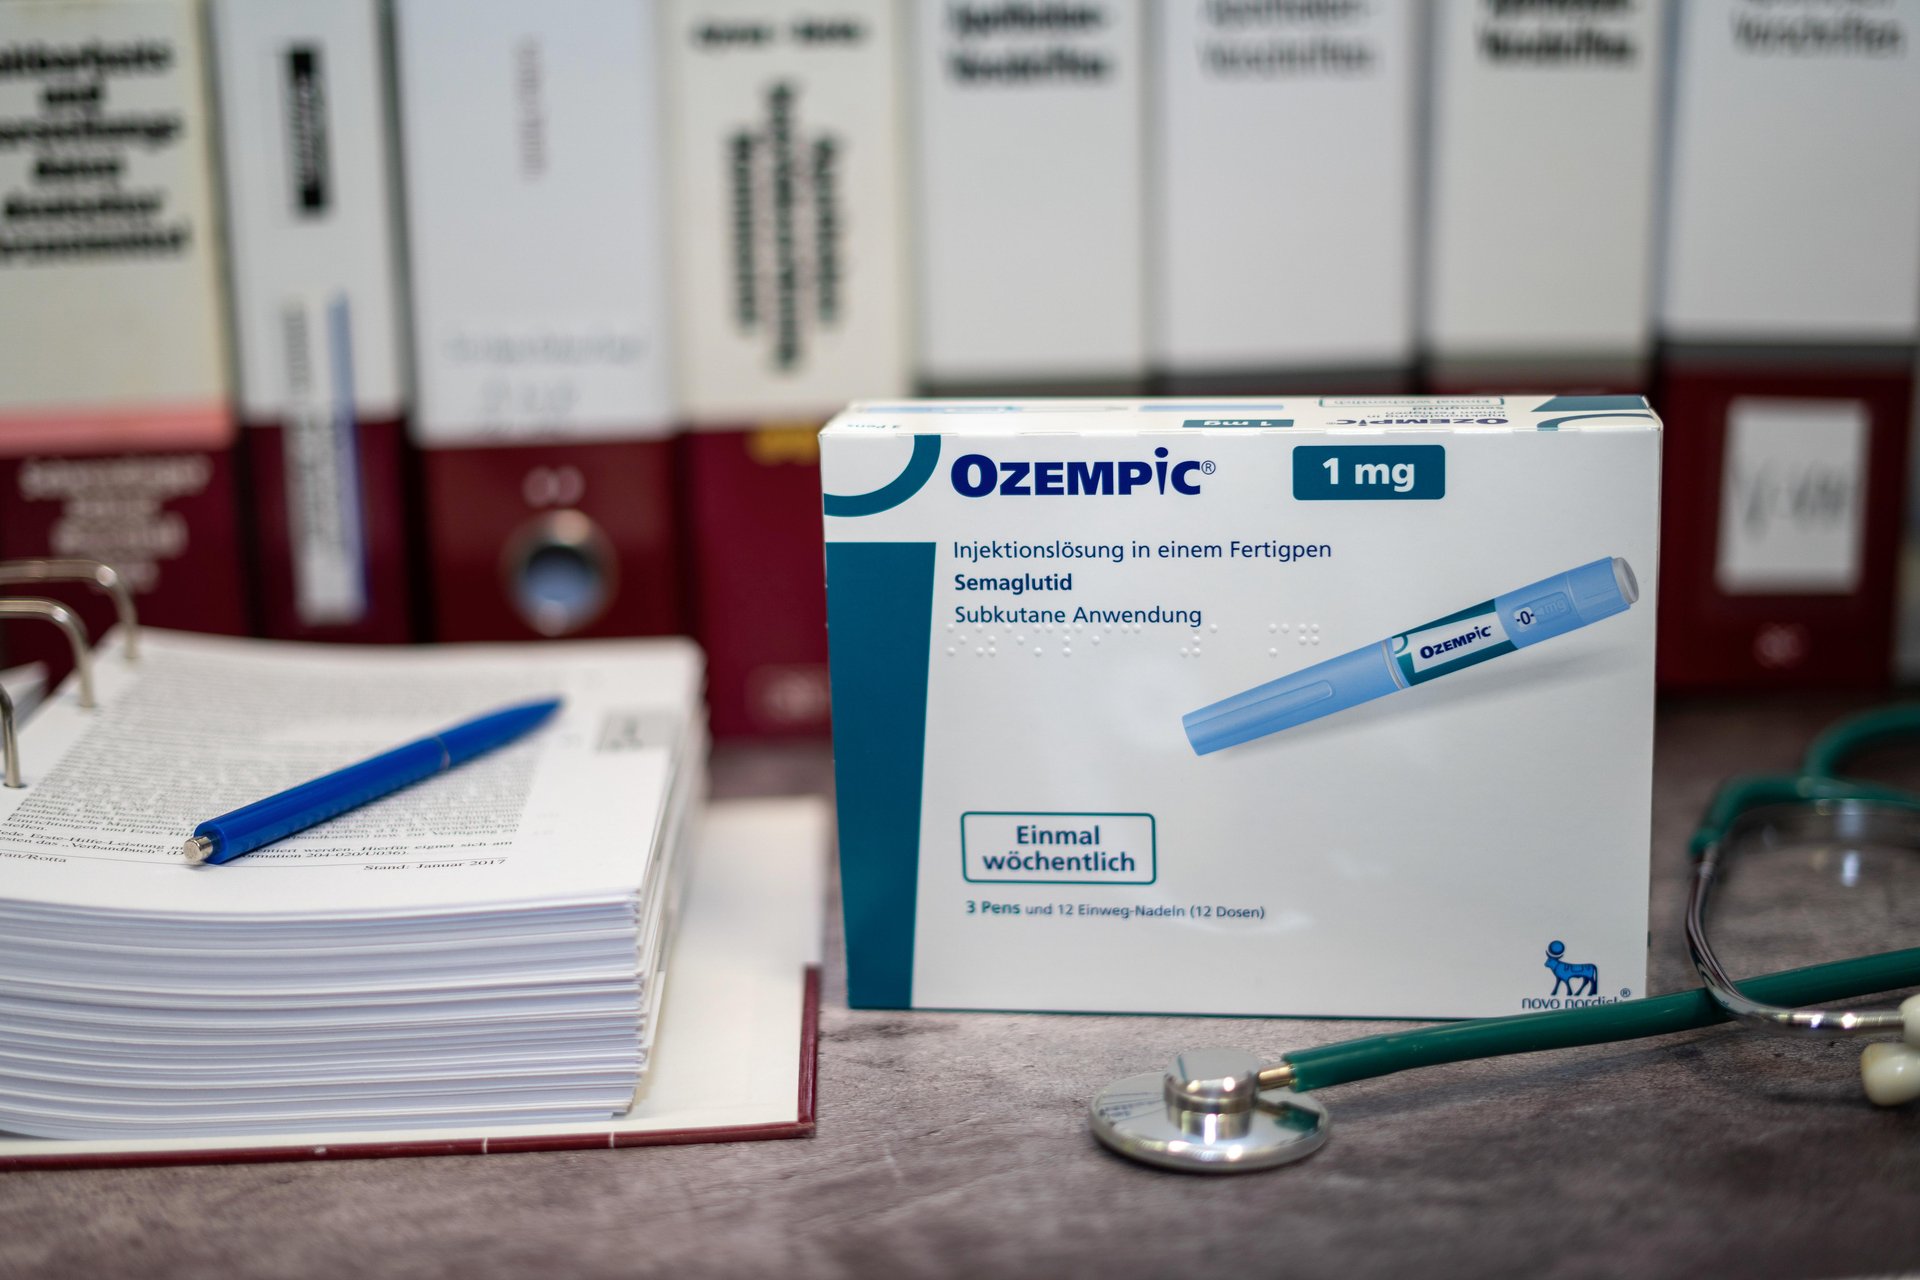 News Picture: Should Kids Take Ozempic, Wegovy? The Idea Has Some Experts Worried